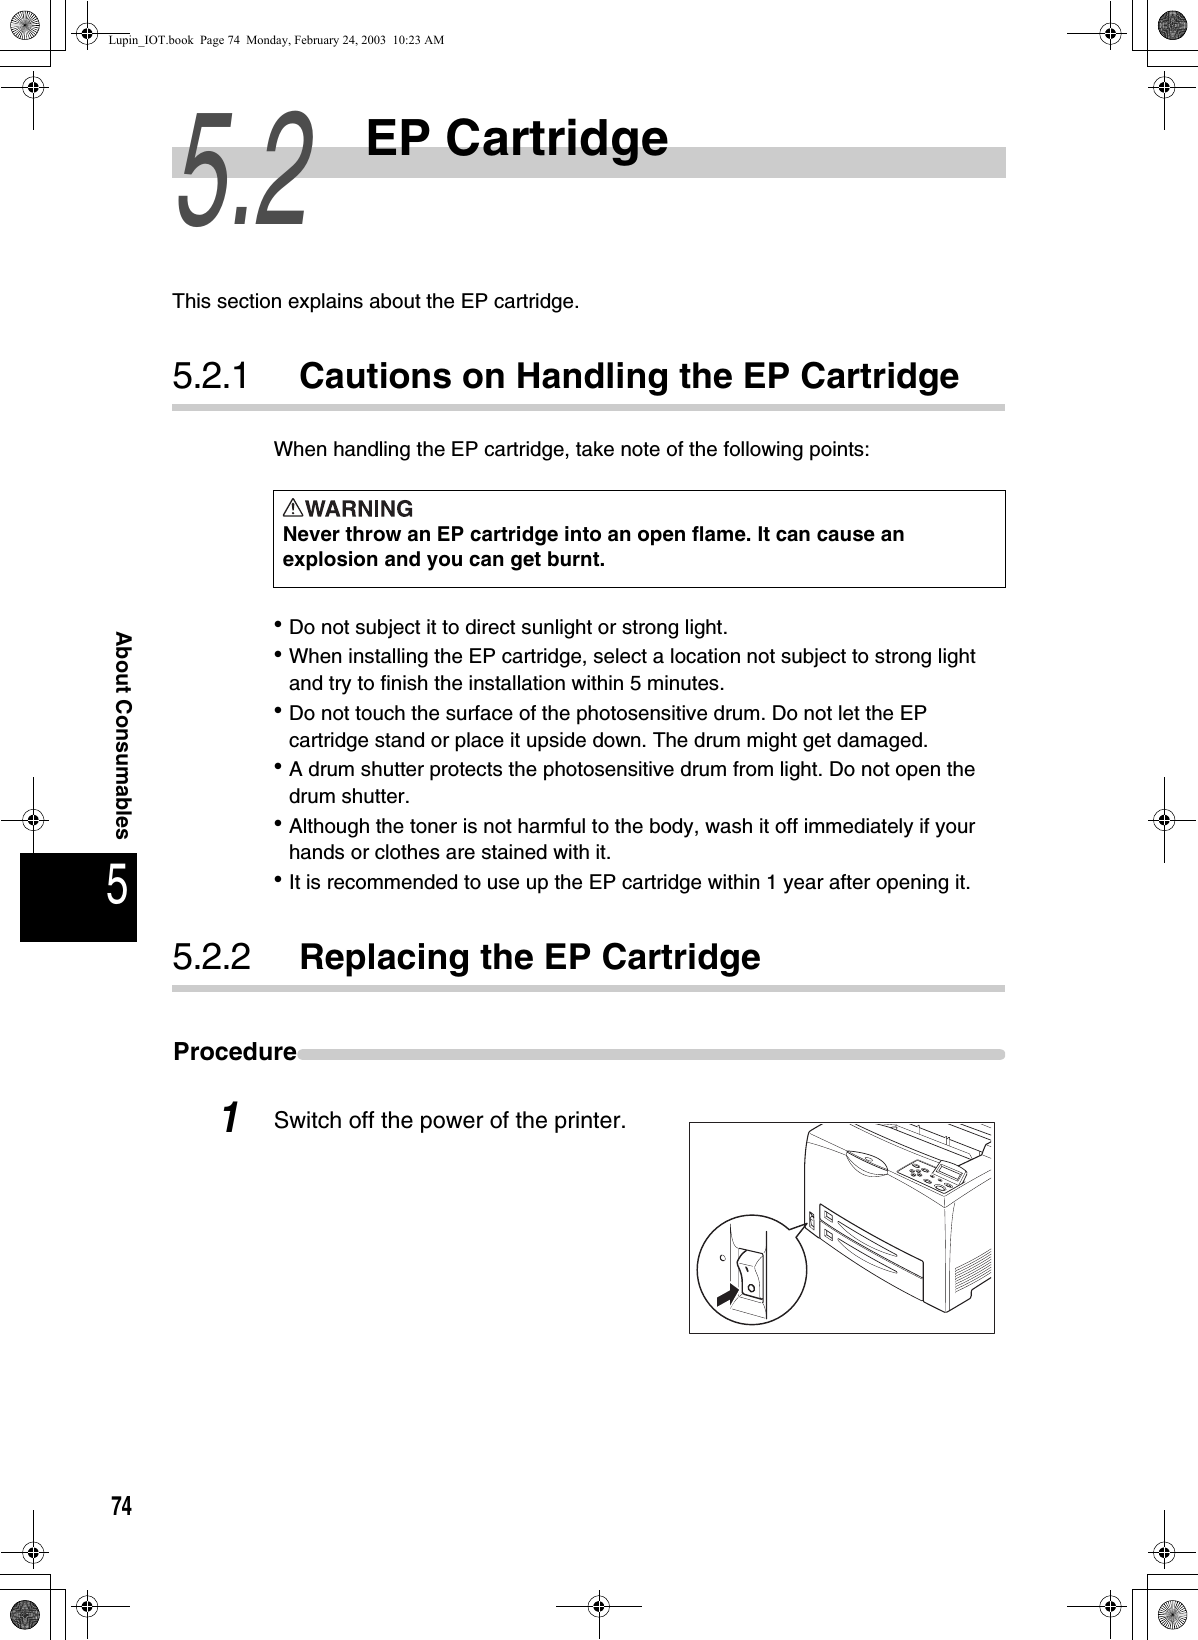 745About Consumables5.2EP CartridgeThis section explains about the EP cartridge. 5.2.1 Cautions on Handling the EP CartridgeWhen handling the EP cartridge, take note of the following points:zDo not subject it to direct sunlight or strong light. zWhen installing the EP cartridge, select a location not subject to strong light and try to finish the installation within 5 minutes. zDo not touch the surface of the photosensitive drum. Do not let the EP cartridge stand or place it upside down. The drum might get damaged. zA drum shutter protects the photosensitive drum from light. Do not open the drum shutter. zAlthough the toner is not harmful to the body, wash it off immediately if your hands or clothes are stained with it. zIt is recommended to use up the EP cartridge within 1 year after opening it. 5.2.2 Replacing the EP CartridgeProcedure1Switch off the power of the printer.  Never throw an EP cartridge into an open flame. It can cause an explosion and you can get burnt.Lupin_IOT.book  Page 74  Monday, February 24, 2003  10:23 AM